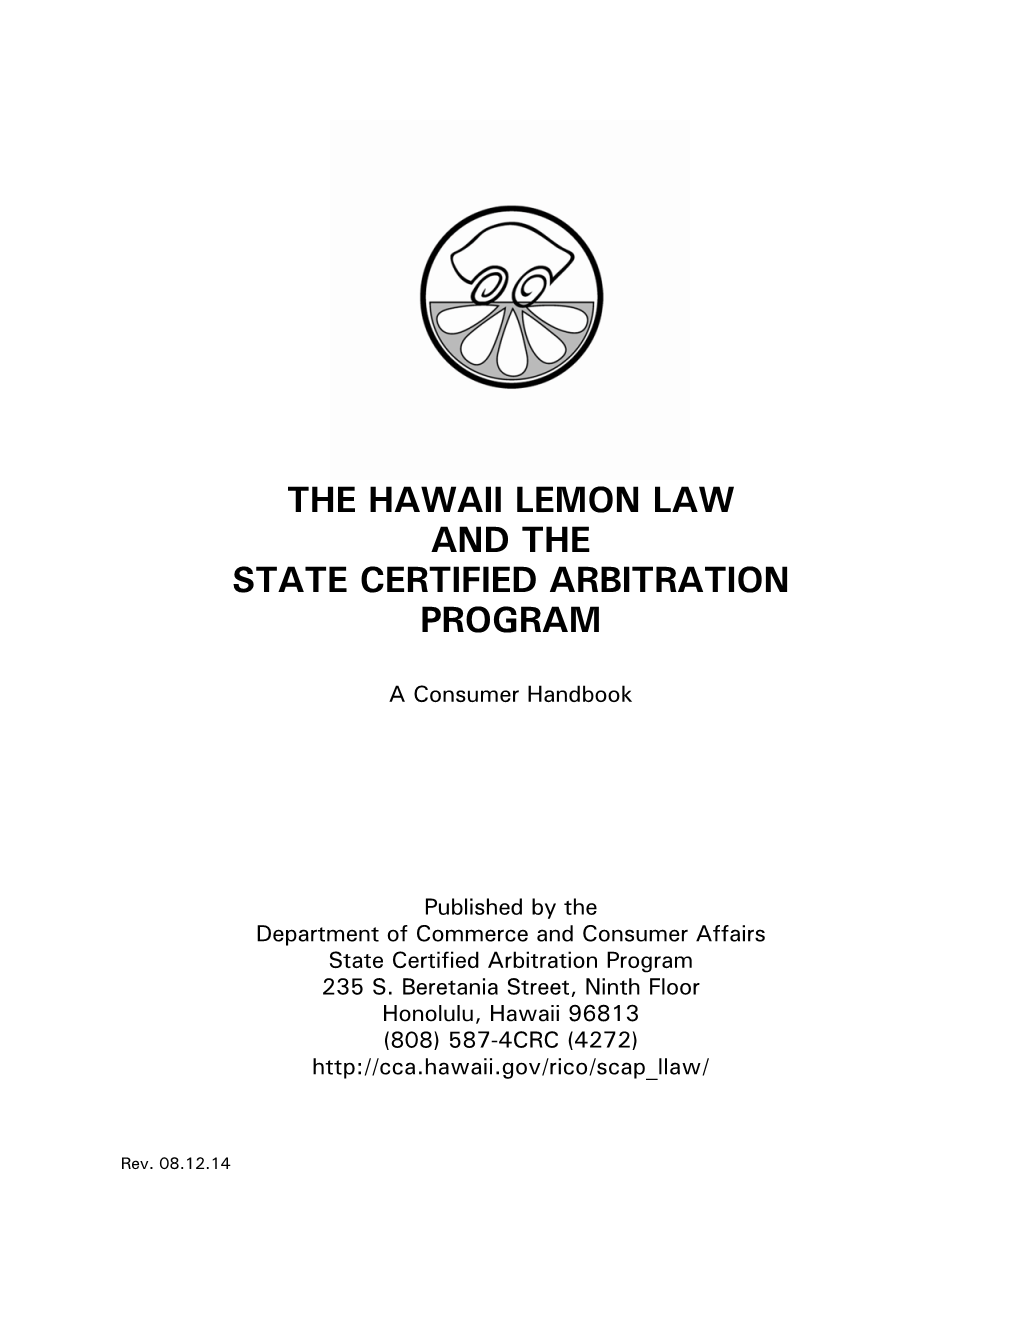 The Hawaii Lemon Law and the State Certified Arbitration Program